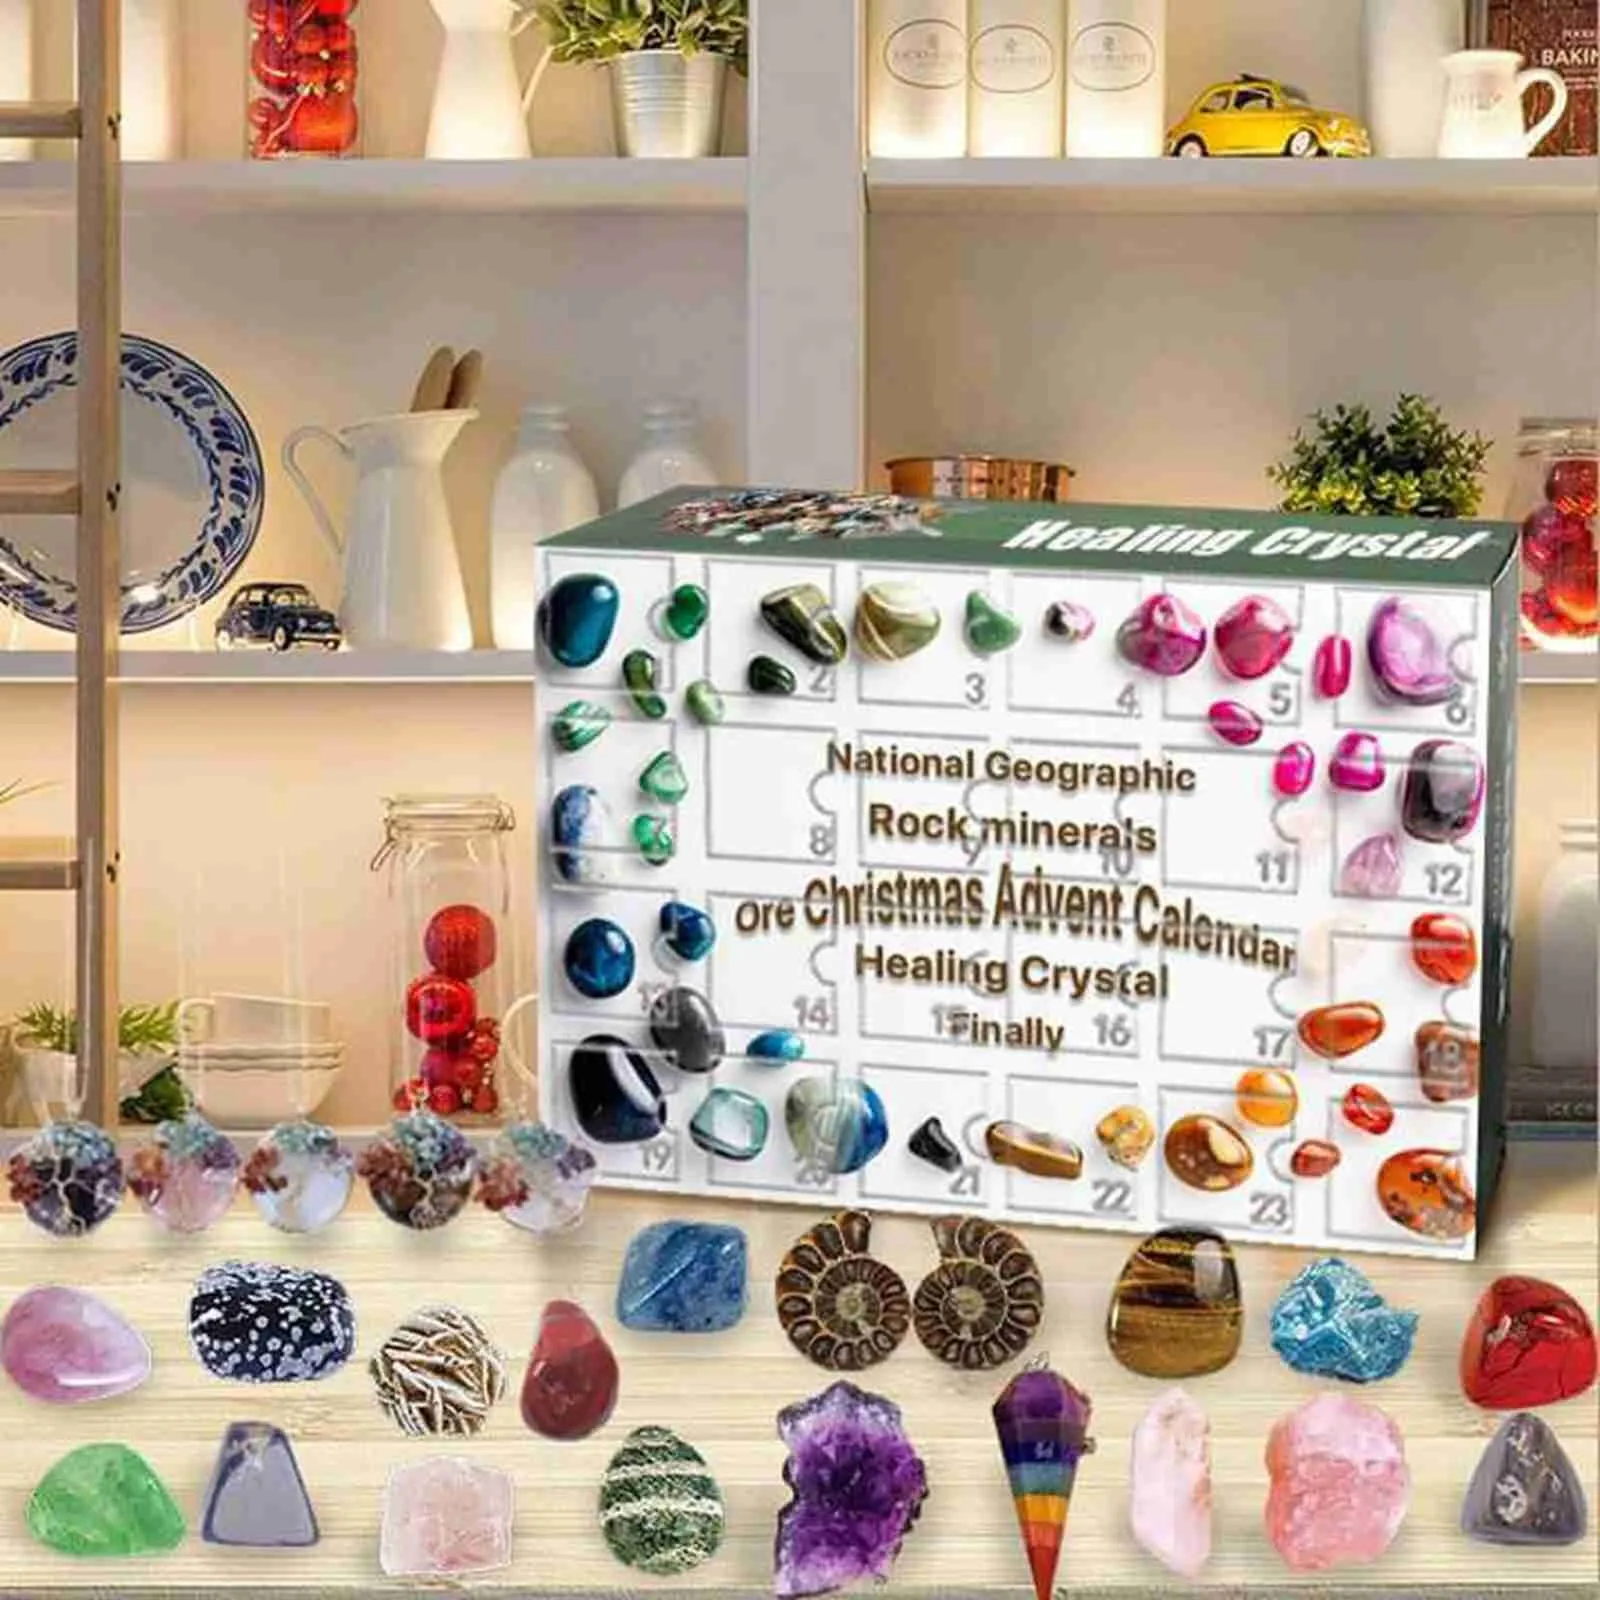 

Kids Christmas Advent Calendar Countdown Healing Crystal Geology Mineral Gemstones Blind Box Funny Educational Toy Gift 24 Days